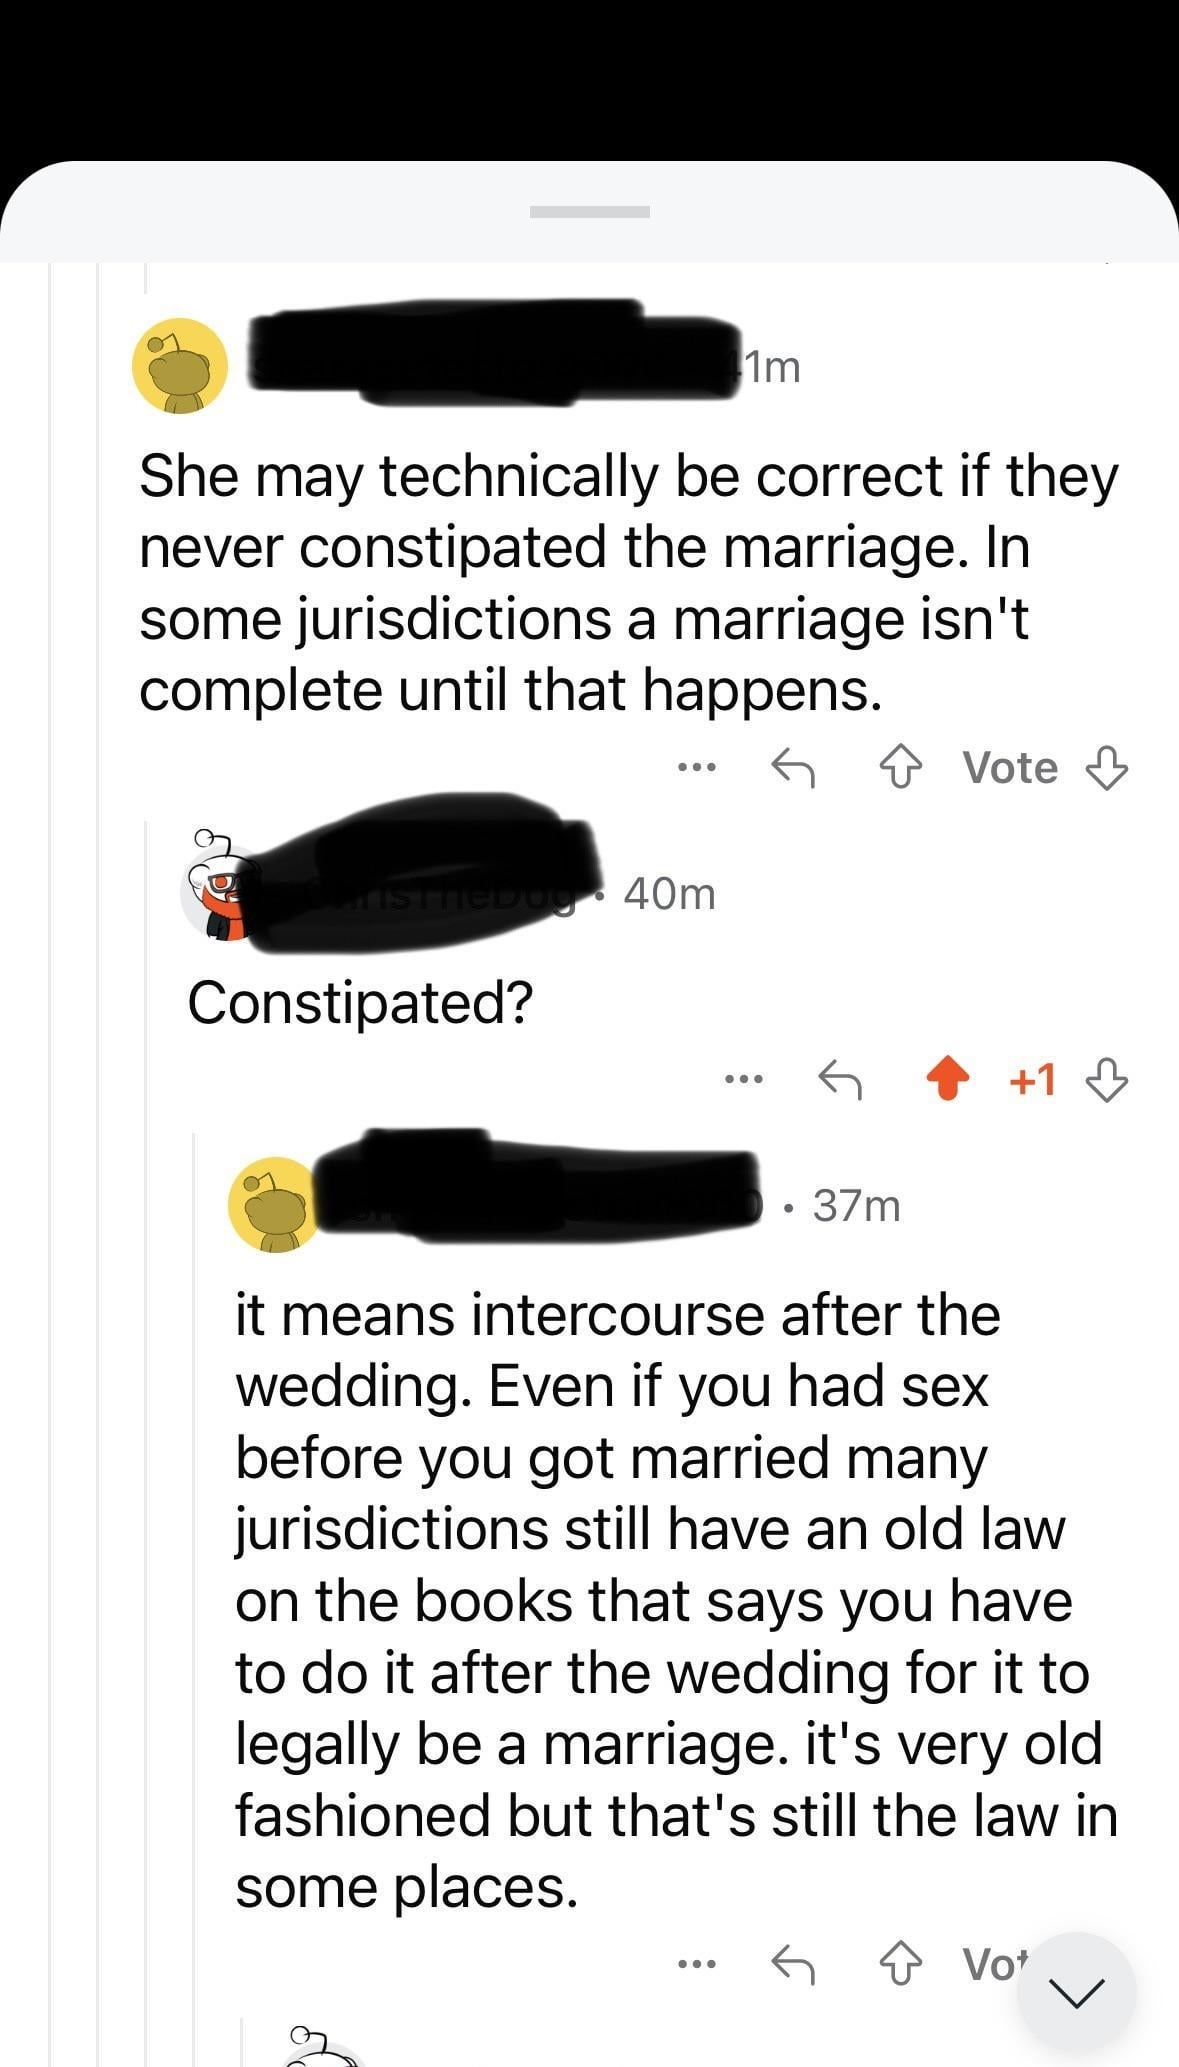 Screenshot of a mobile device showing a conversation thread from a social media platform with users discussing the interpretation of a marriage law